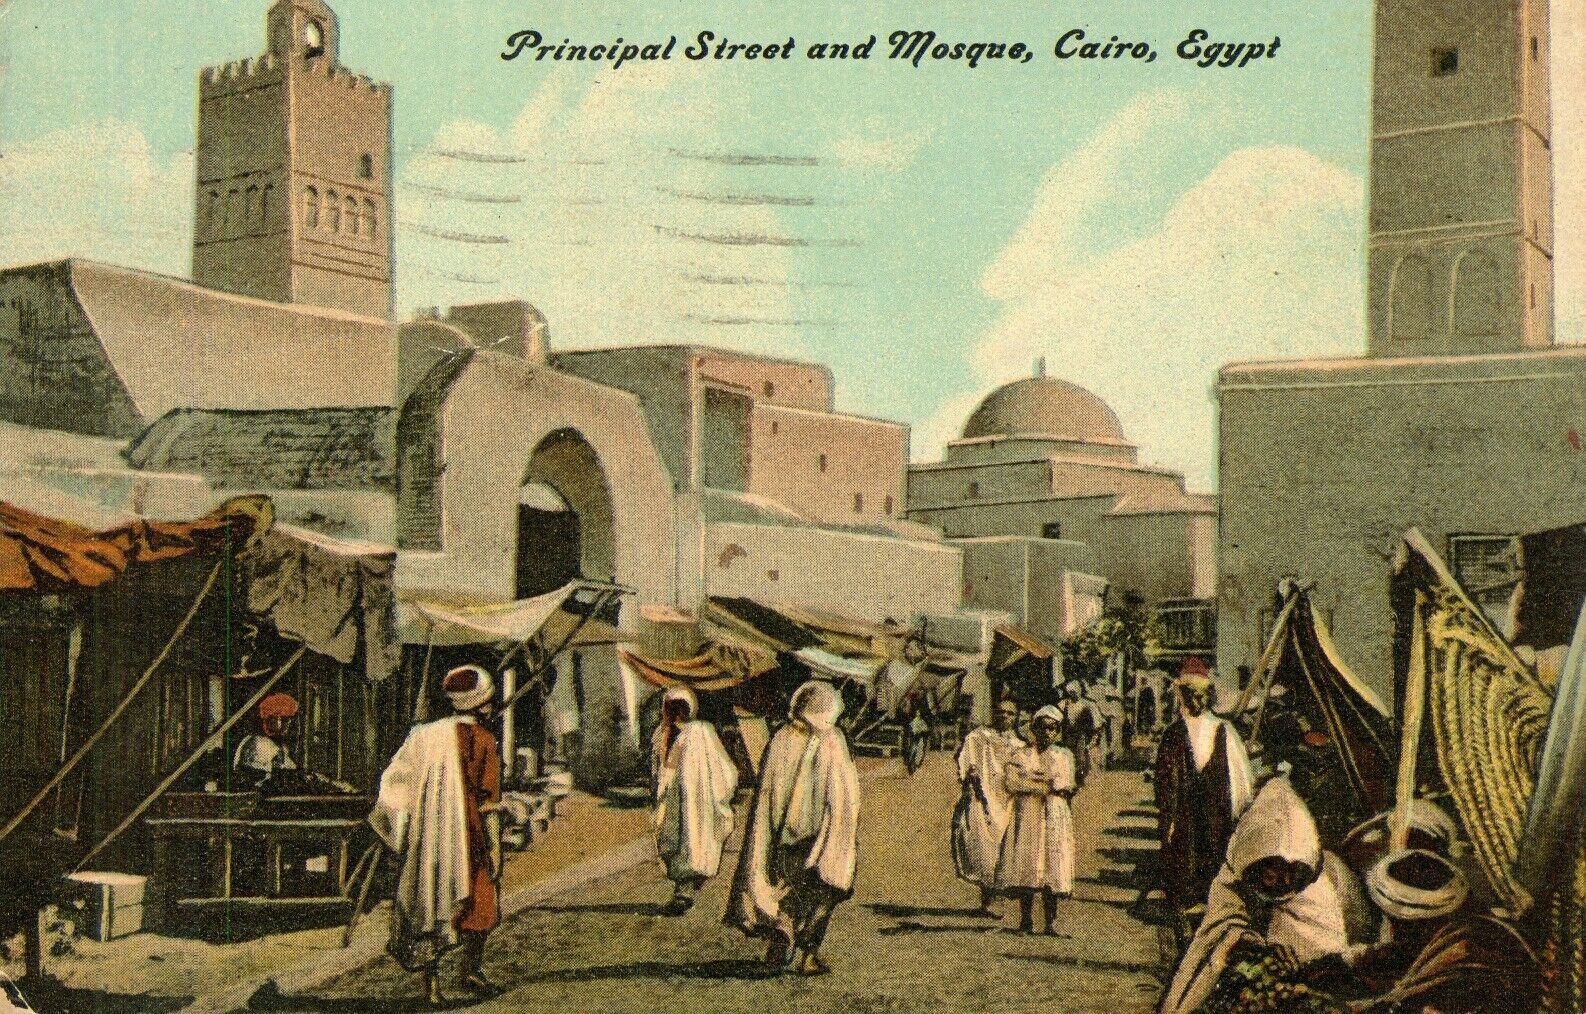 1919 EGYPT Postcard PRINCIPAL STREET and MOSQUE, CAIRO, African Continent 